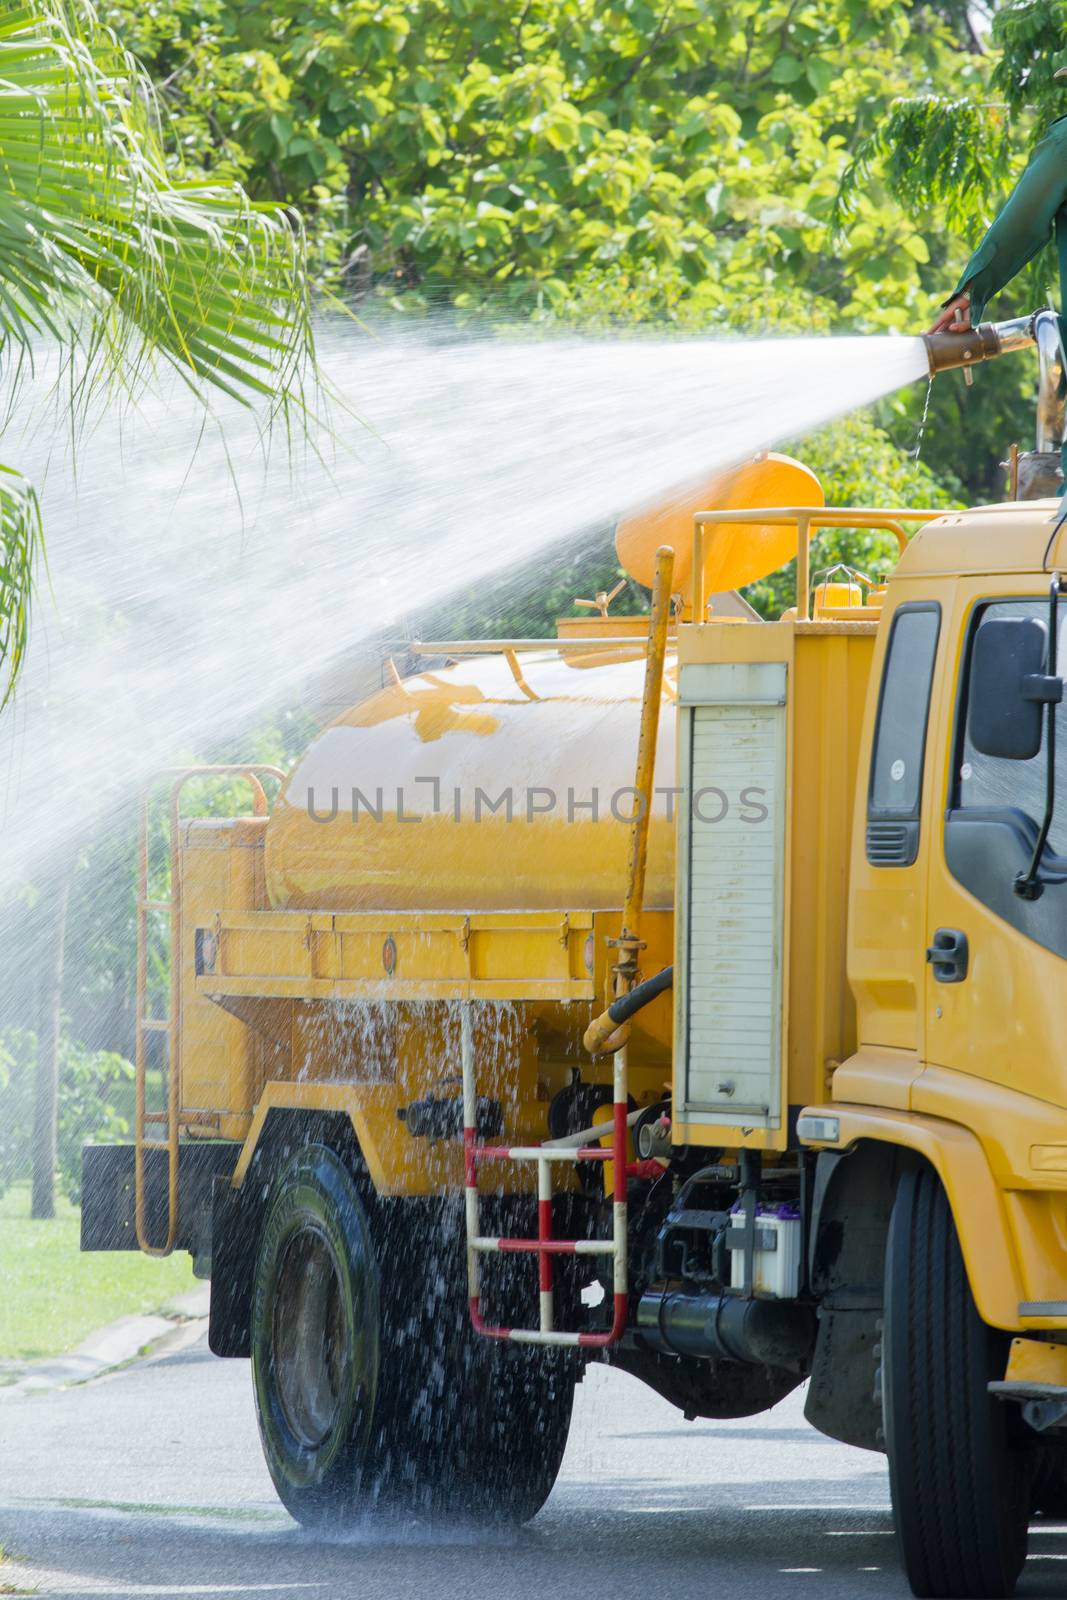 water truck watering in the garden by a3701027